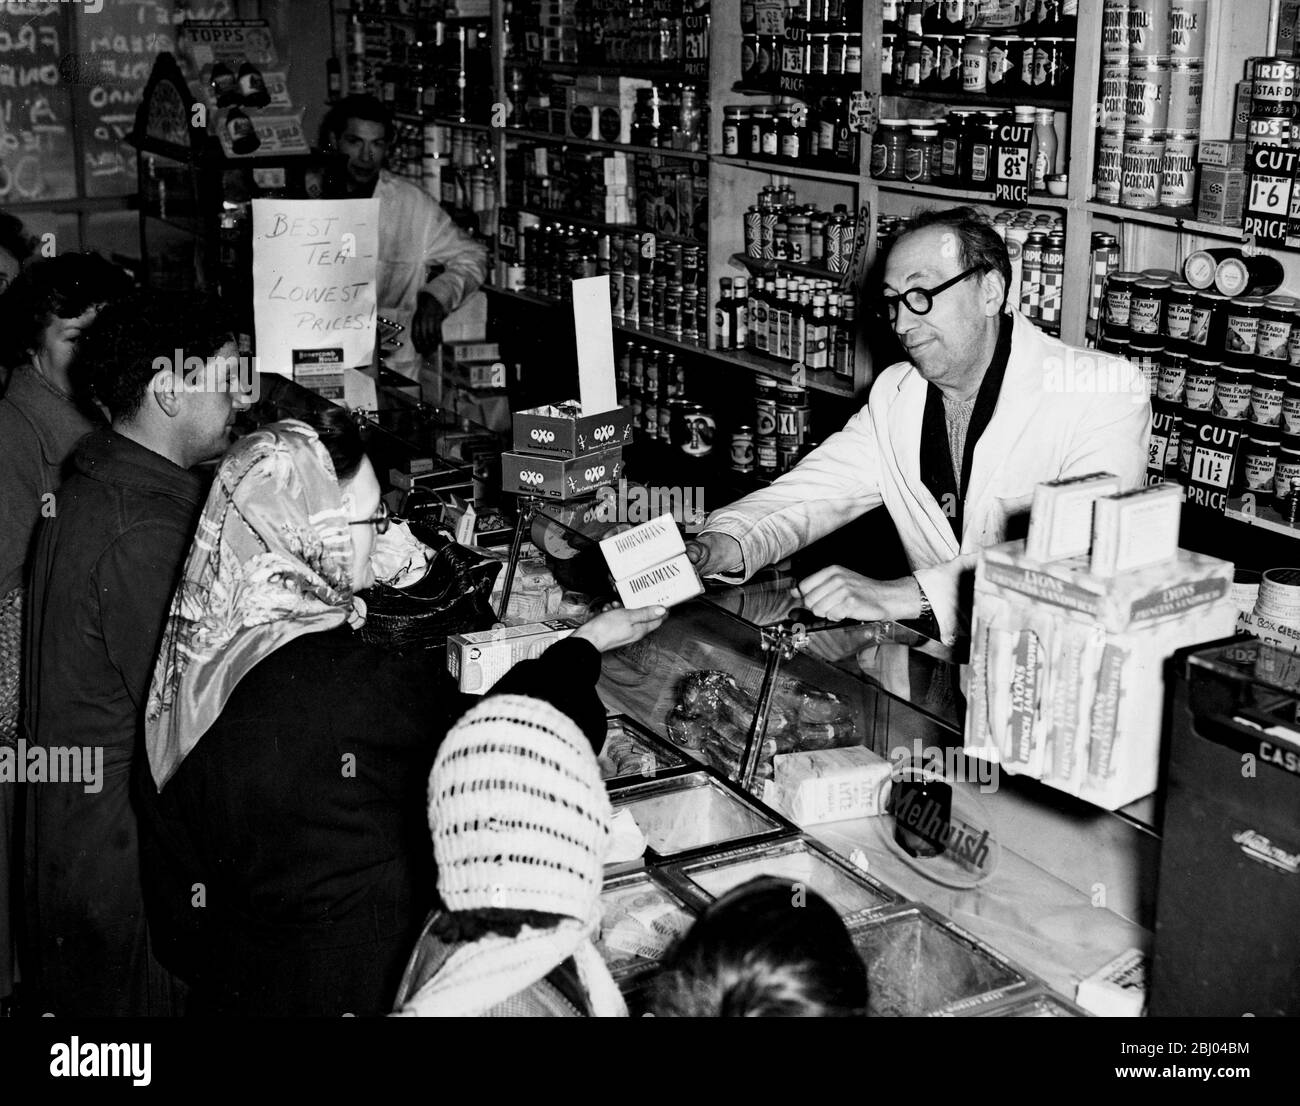 Risk shops Black and White Stock Photos & Images - Alamy